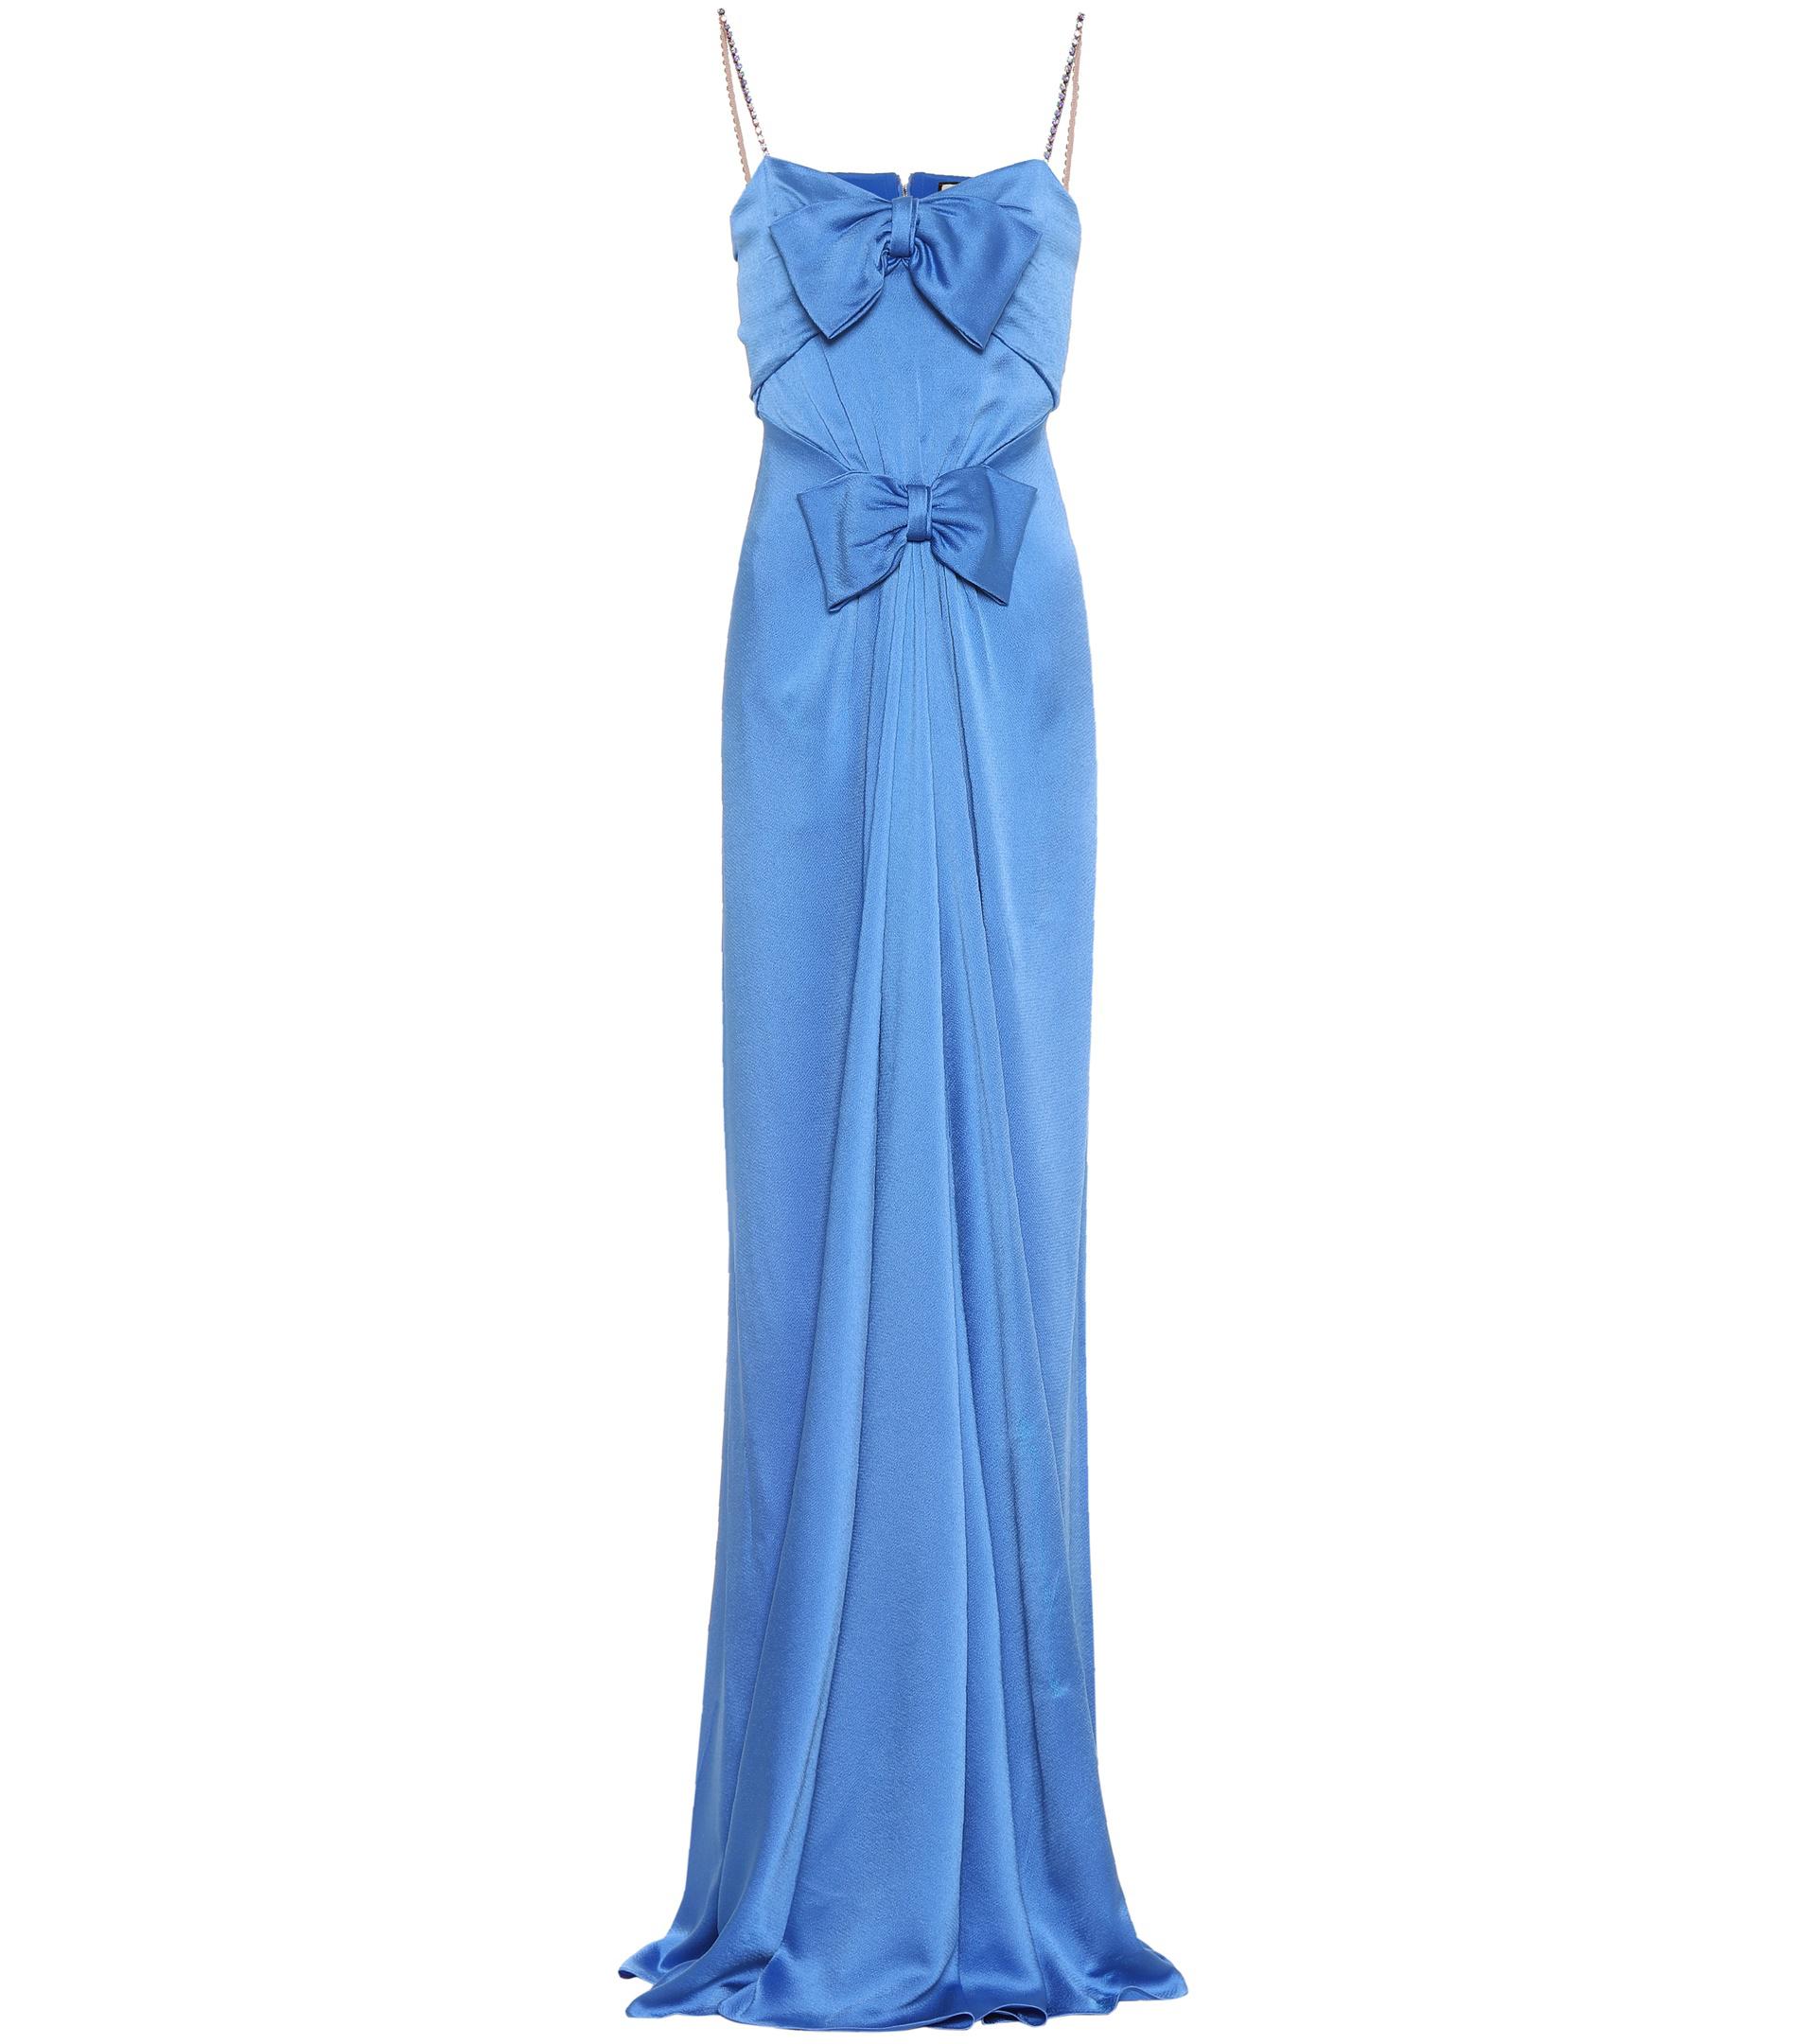 Gucci Embellished Satin Gown in Blue | Lyst